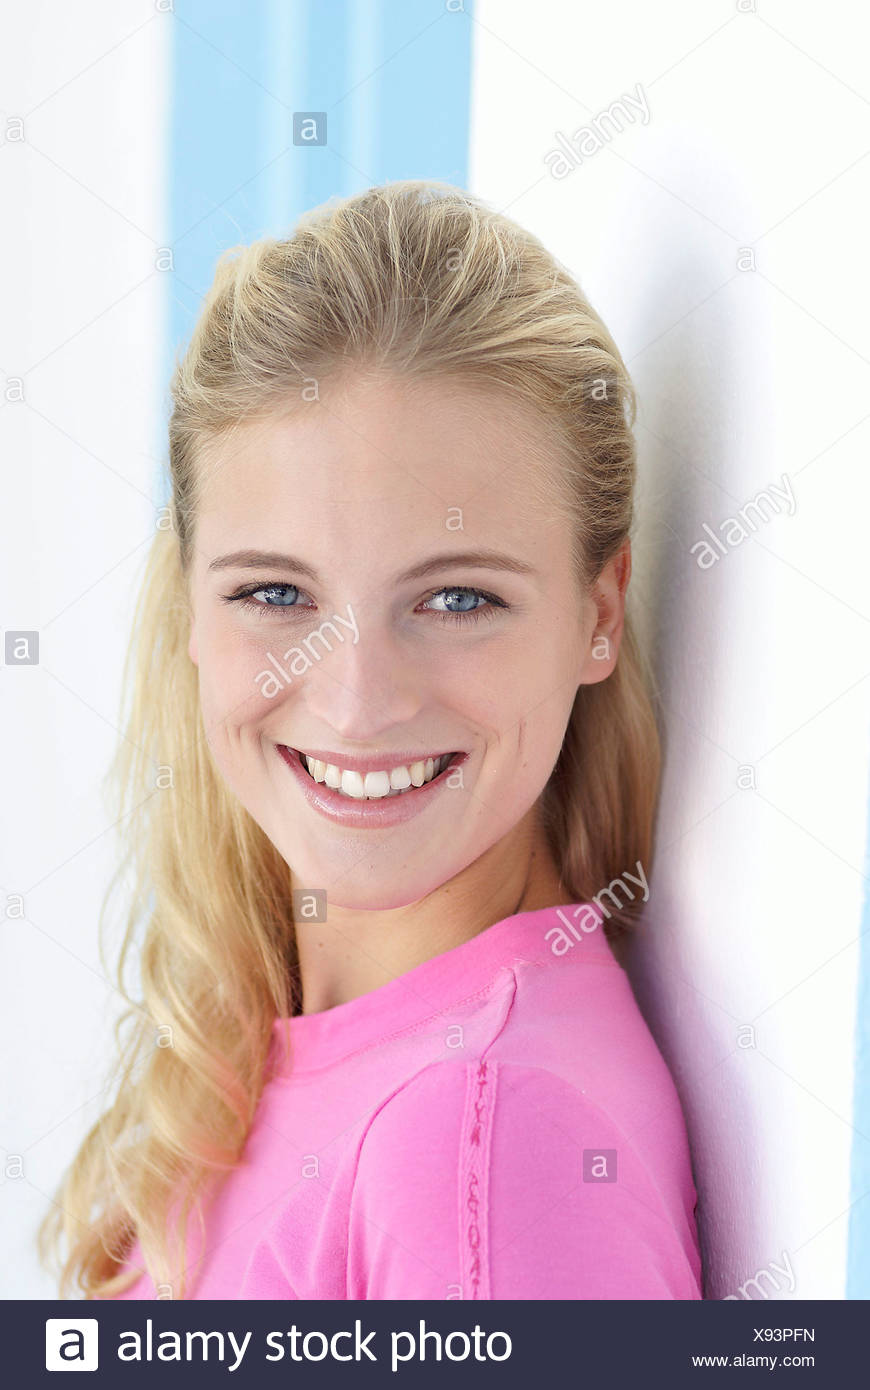 Female With Long Blonde Hair Wearing A Pink Top And Natural